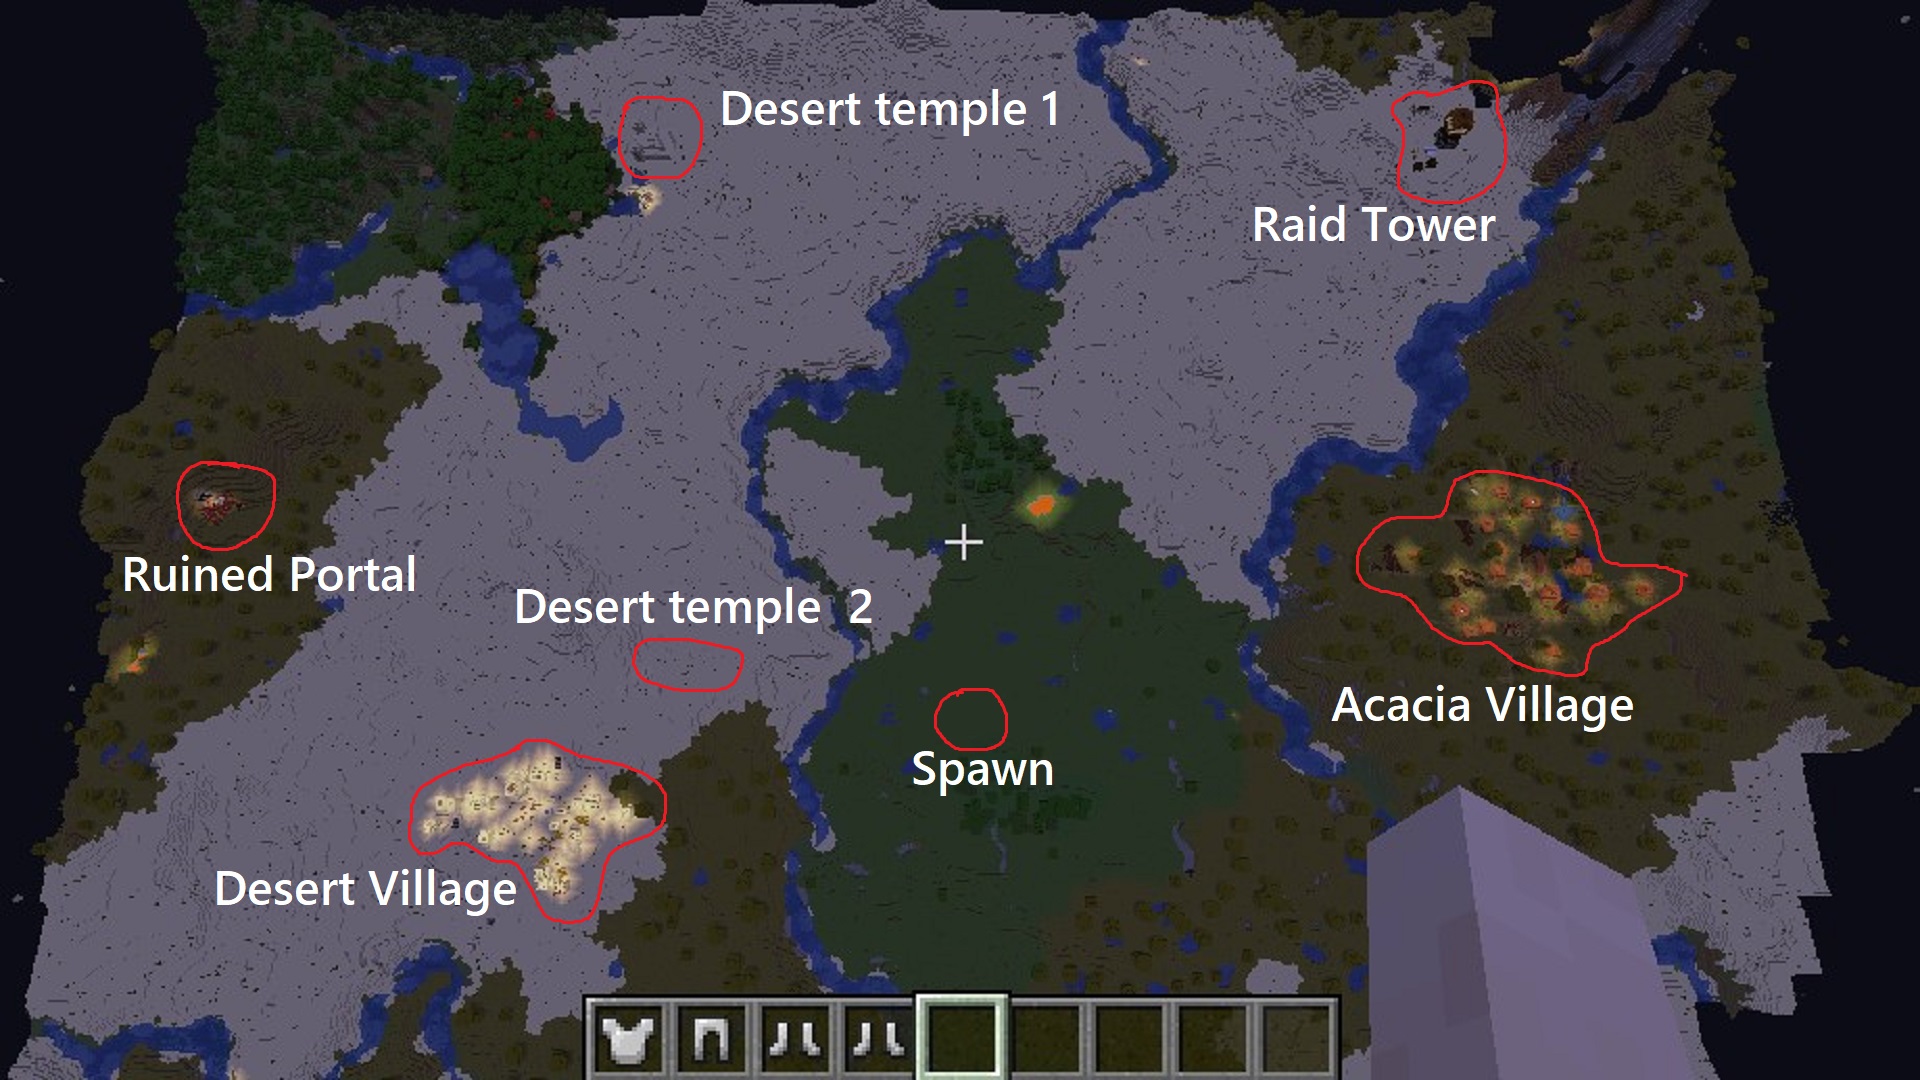 4 Villages with 2 desert Temples and raid tower with a Skeleton spawner near spawn.